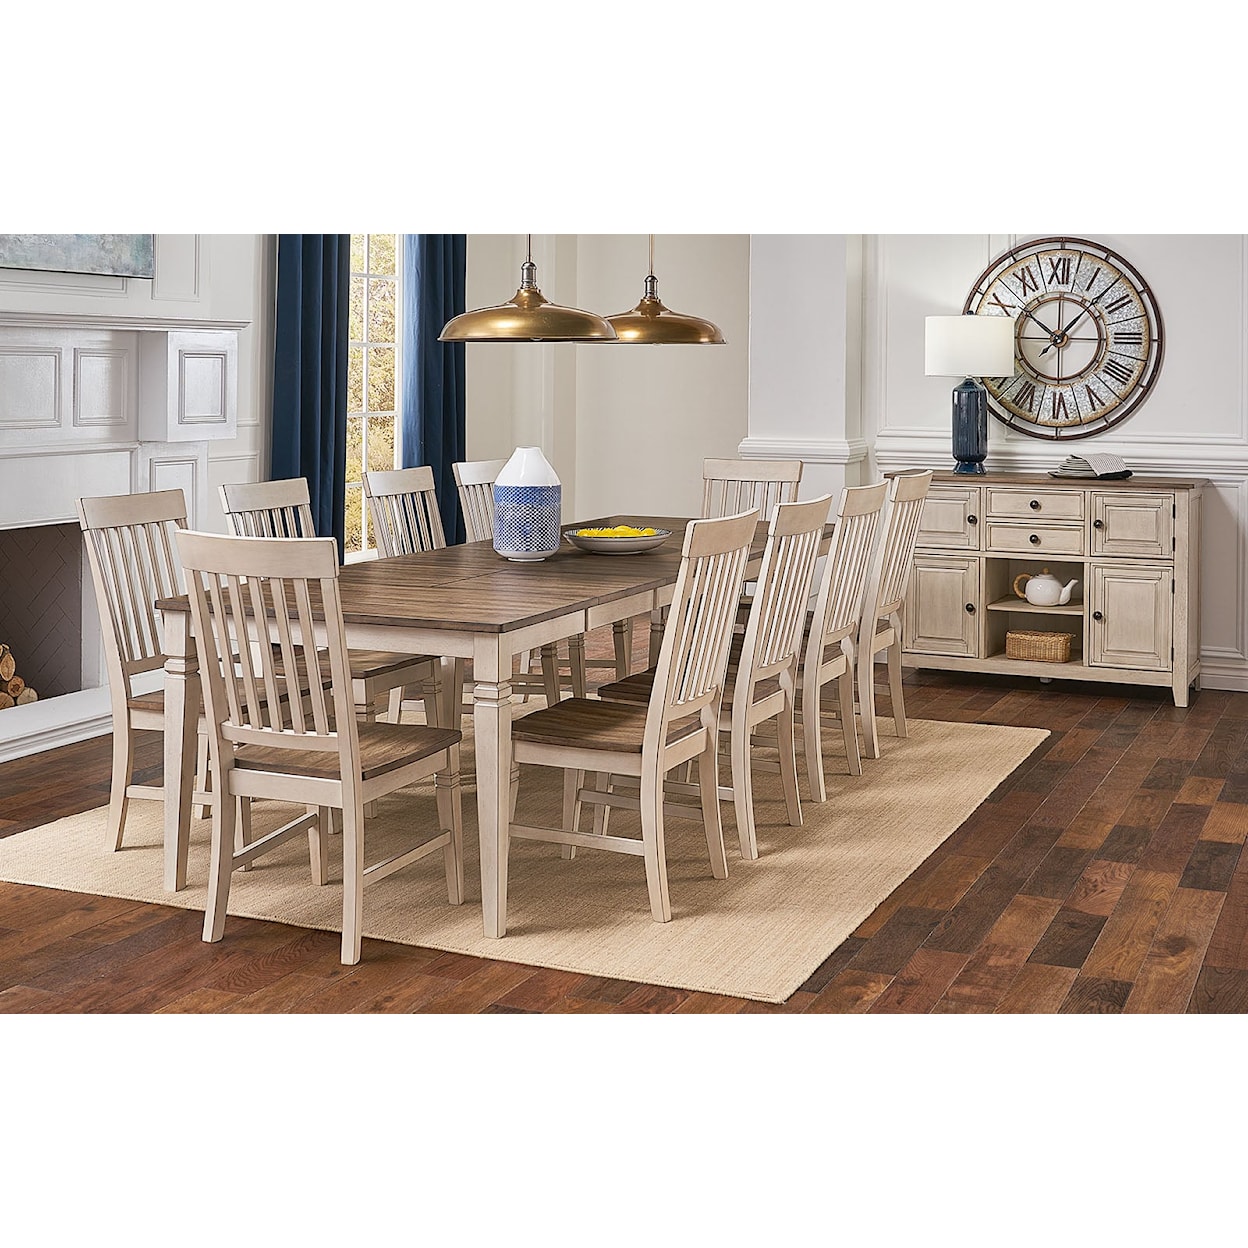 AAmerica Beacon Formal Dining Room Group